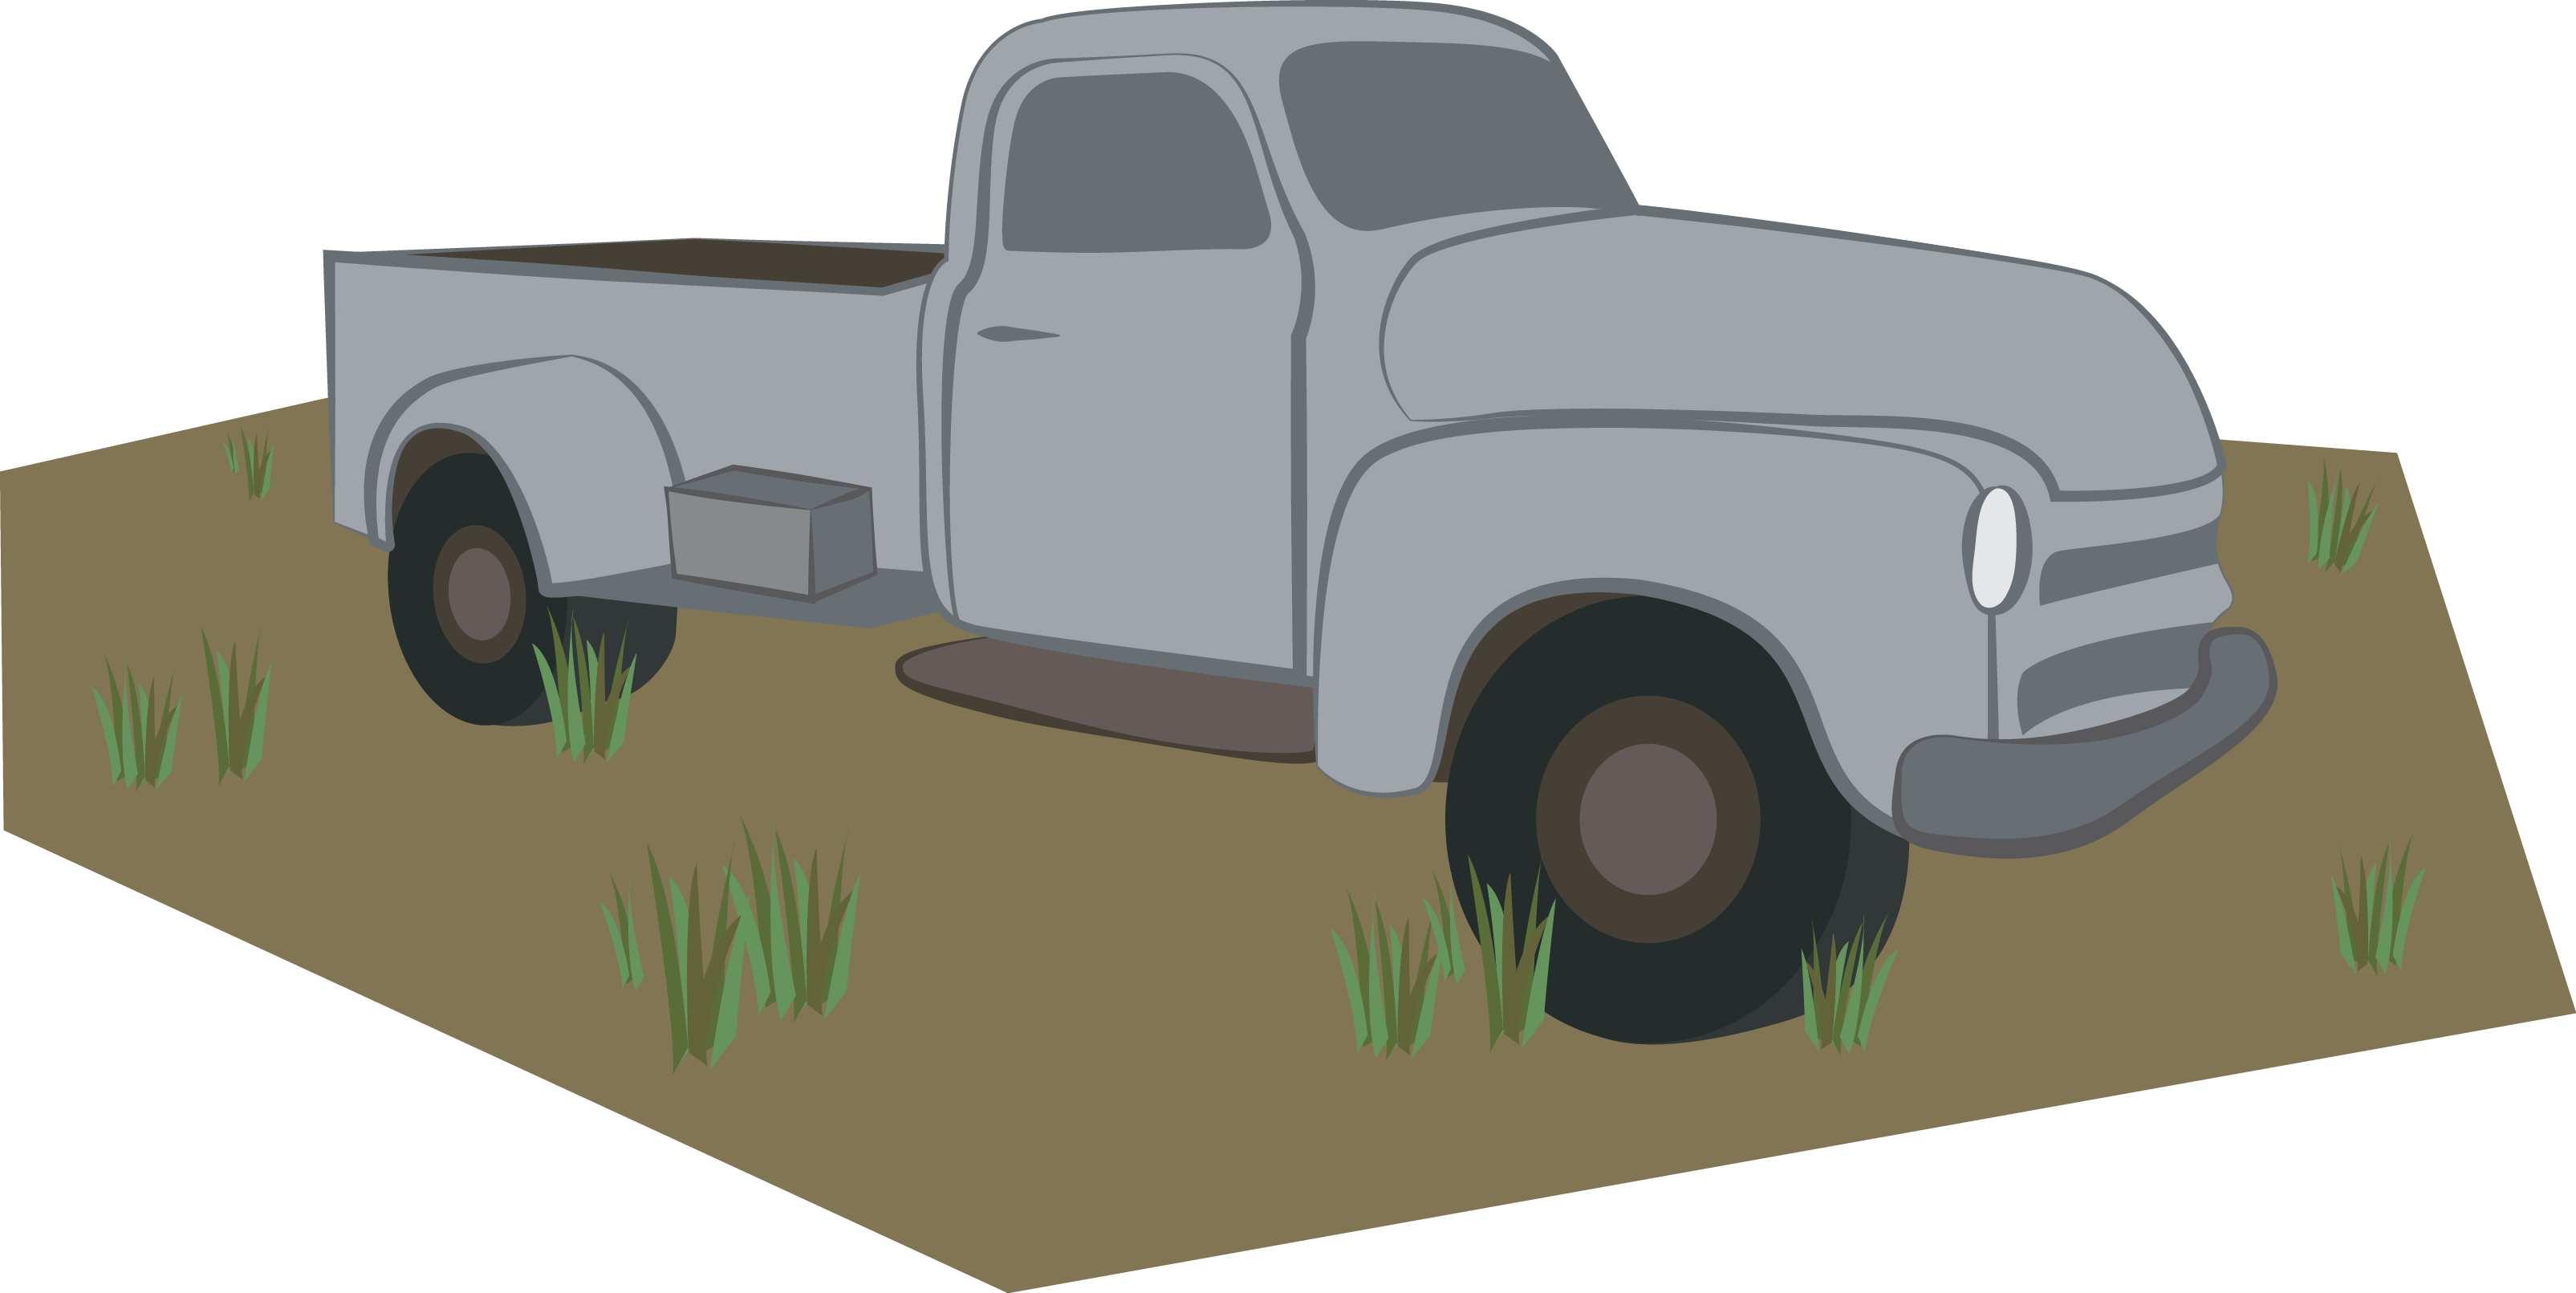 This is a graphic of a pickup.